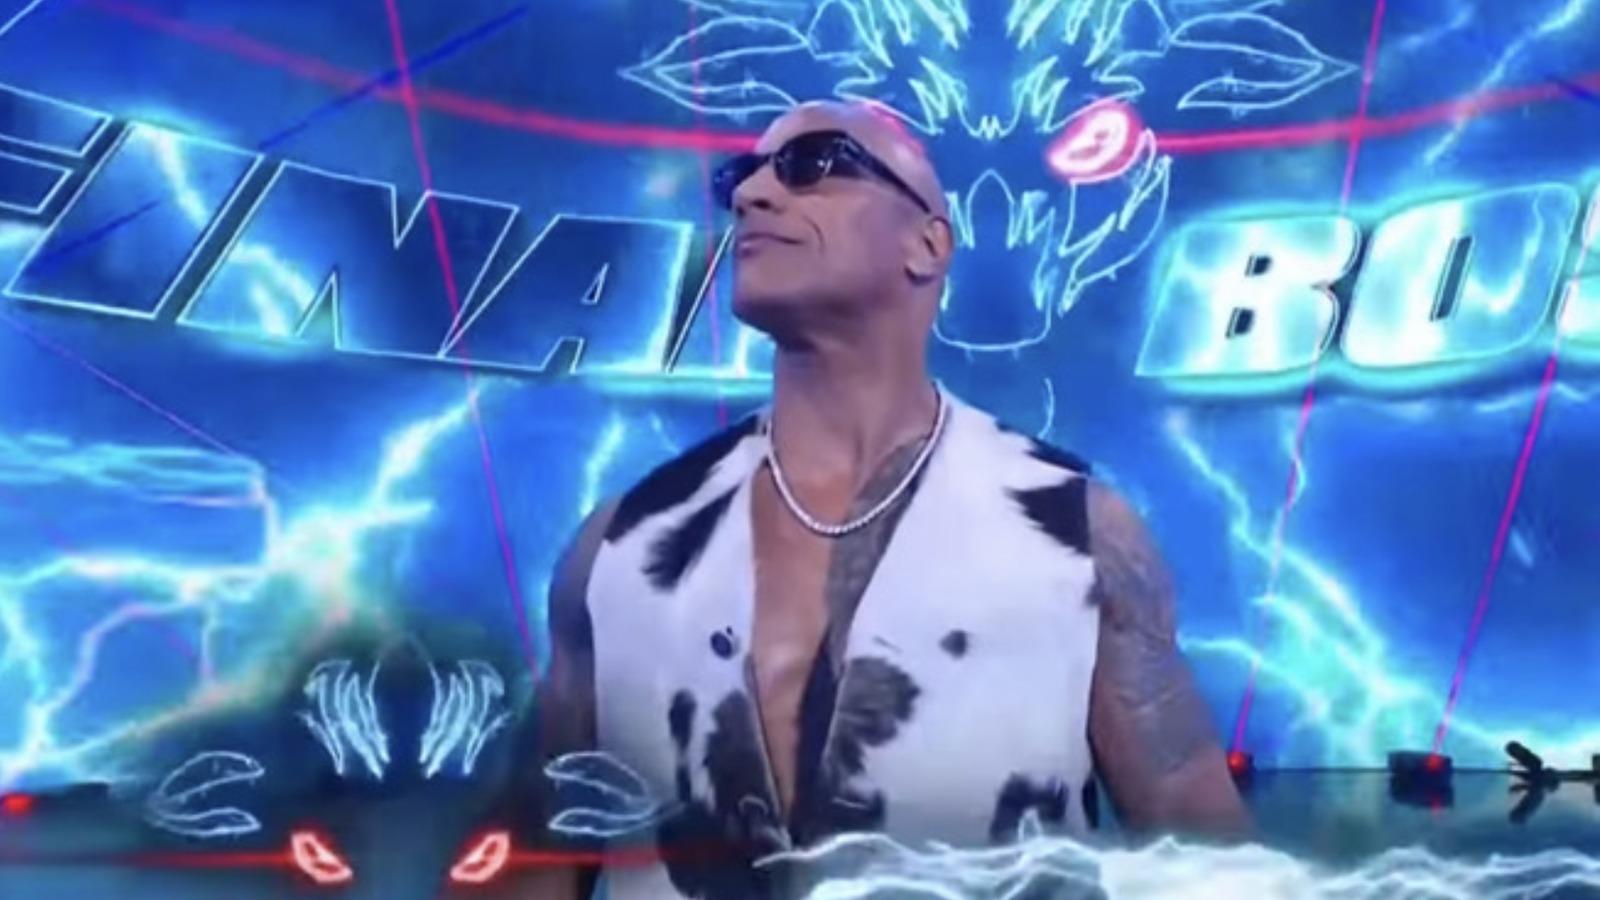 The Rock takes credit for making WWE “cool again” after record-breaking Monday Night Raw gate